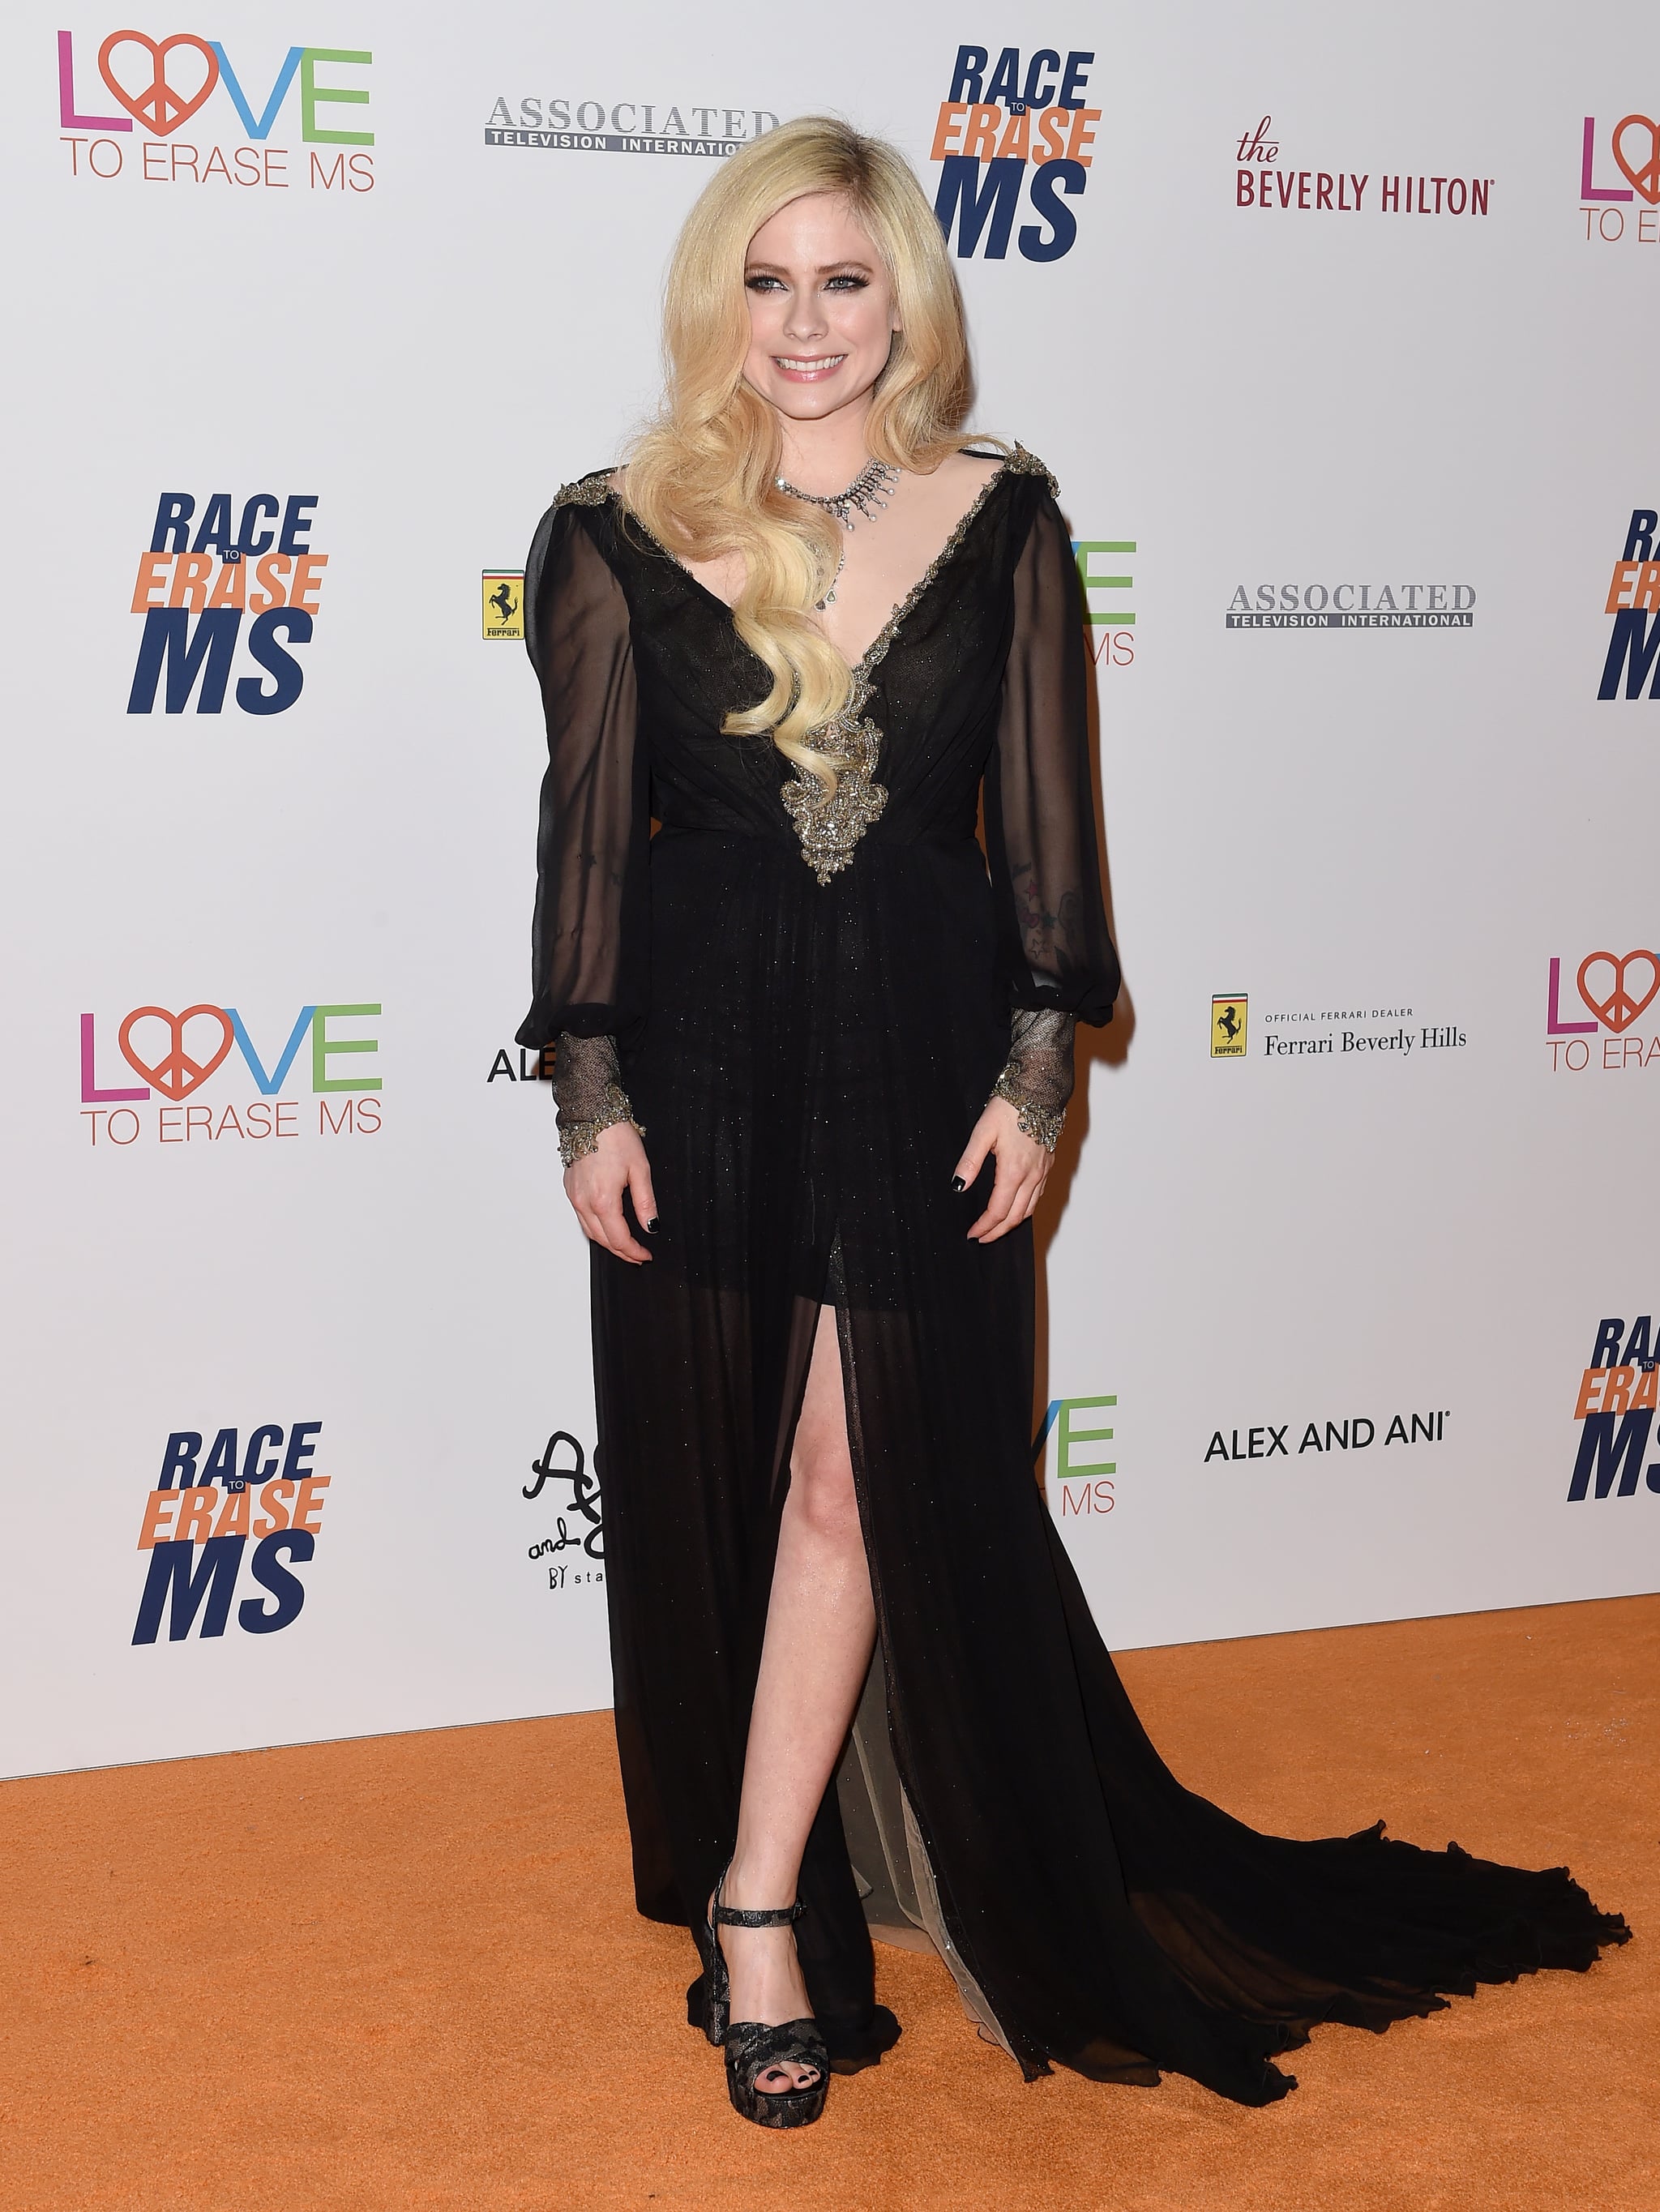 BEVERLY HILLS, CA - APRIL 20:  Singer Avril Lavigne arrives at the 25th Annual Race to Erase MS Gala at The Beverly Hilton Hotel on April 20, 2018 in Beverly Hills, California.  (Photo by Axelle/Bauer-Griffin/FilmMagic)